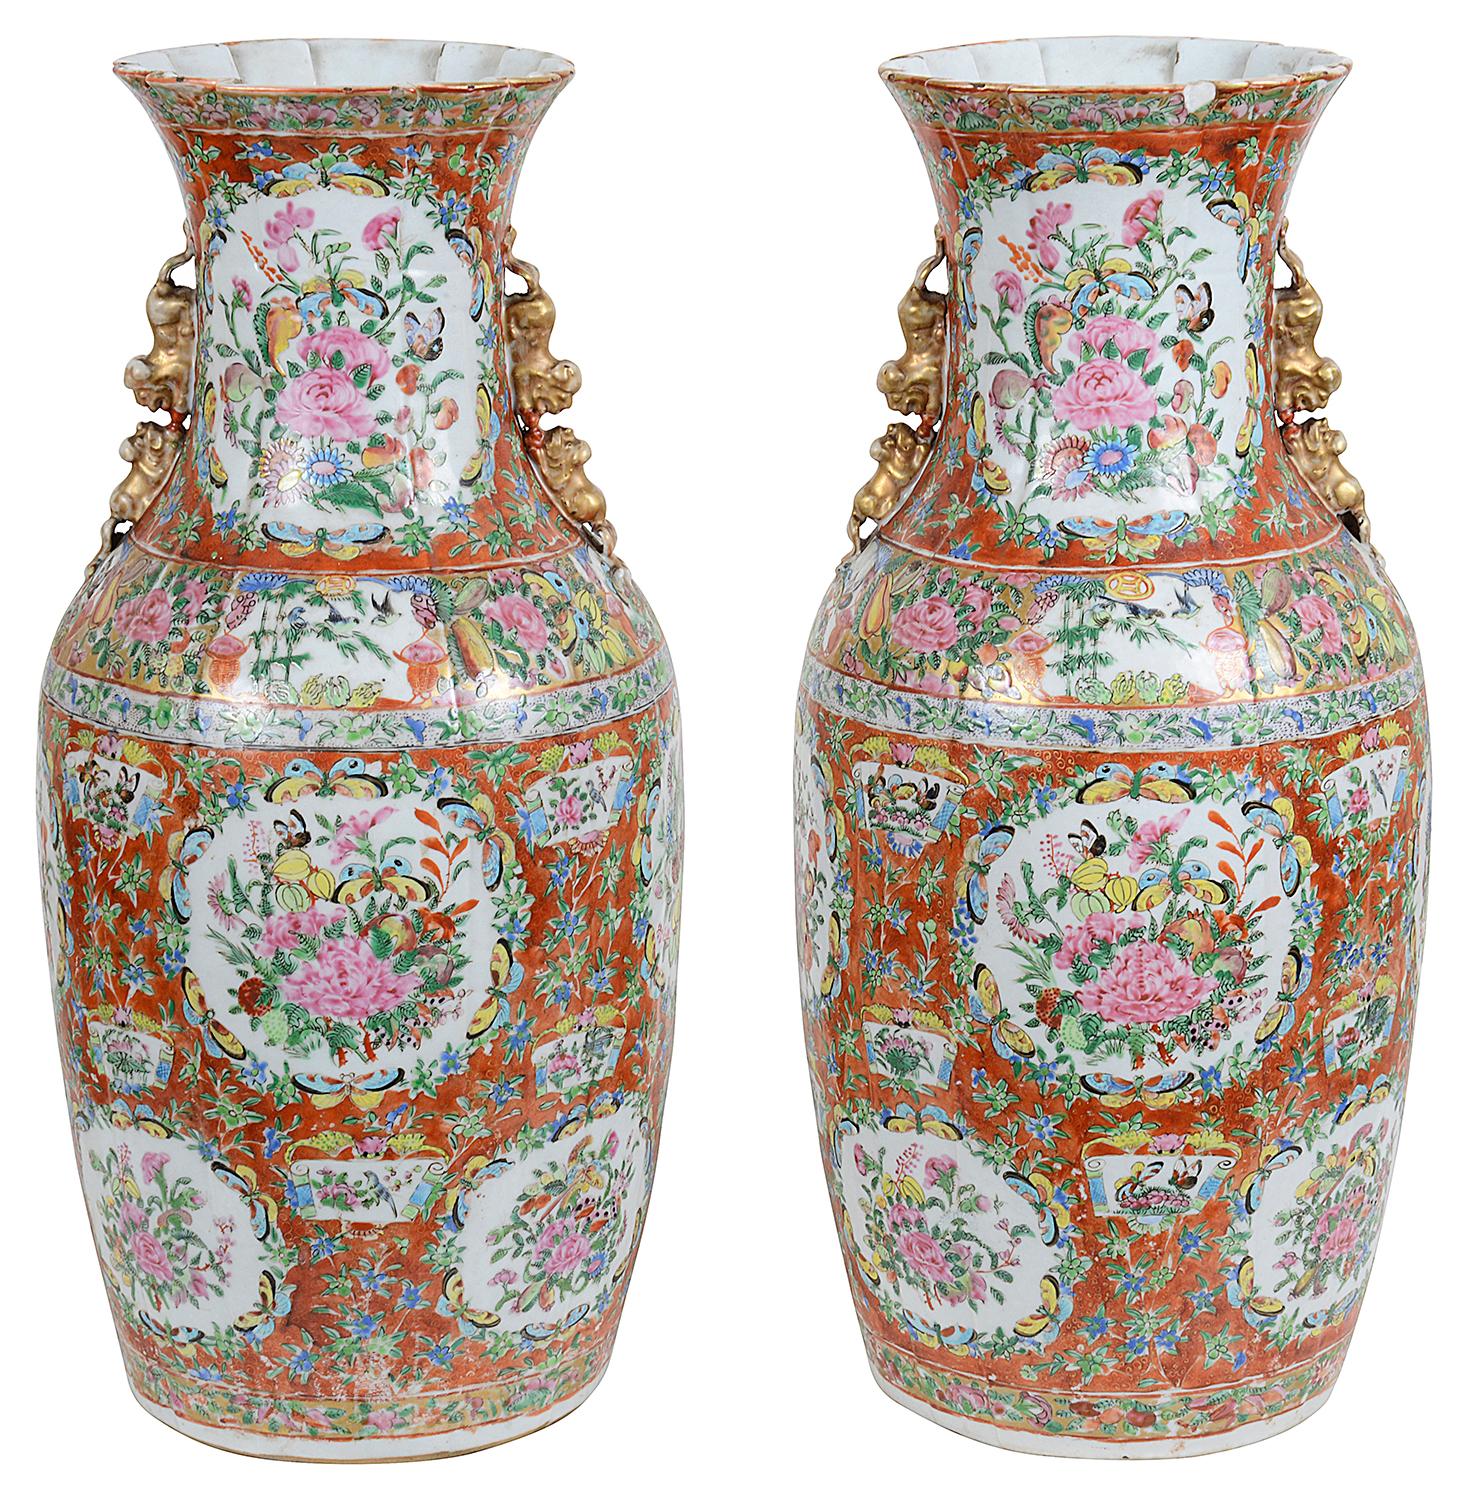 A very good quality pair of 19th century Chinese Cantonese, Rose medallion vases, each with unusual orange ground, inset painted panels of exotic flowers, foliage and butterflies, a pleated neck and mythical dog of foo handles.
 